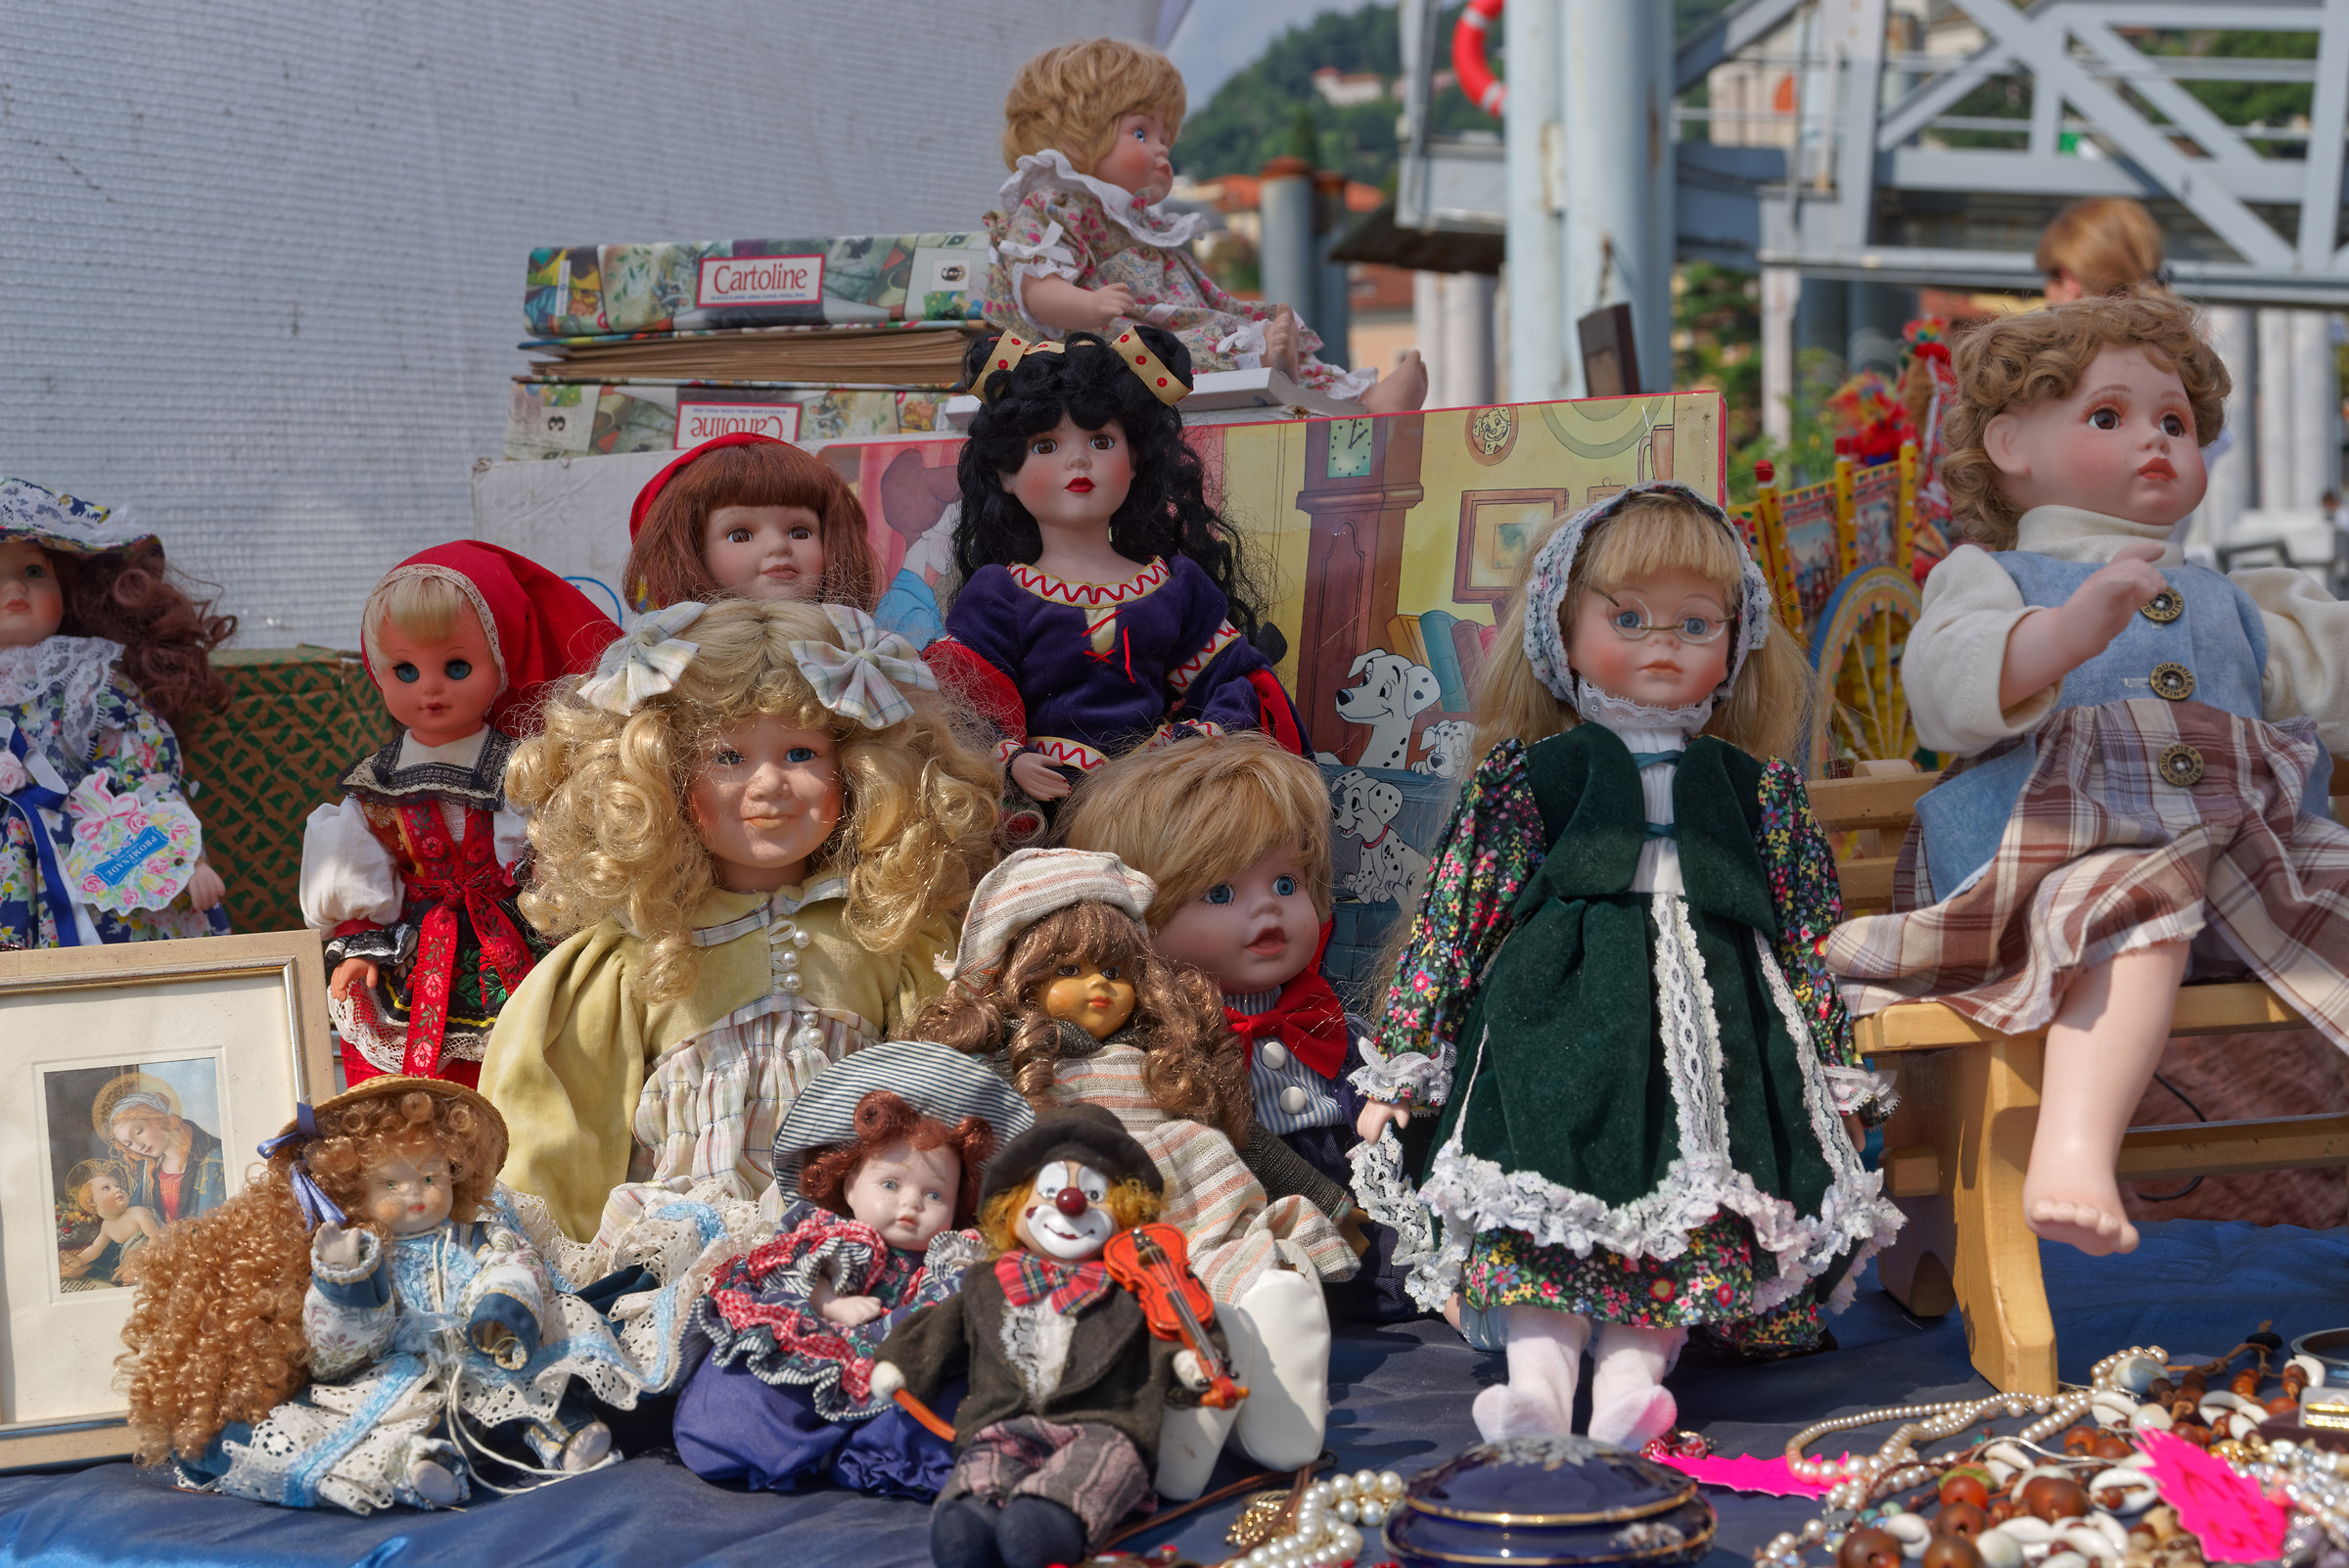 Dolls at the market...